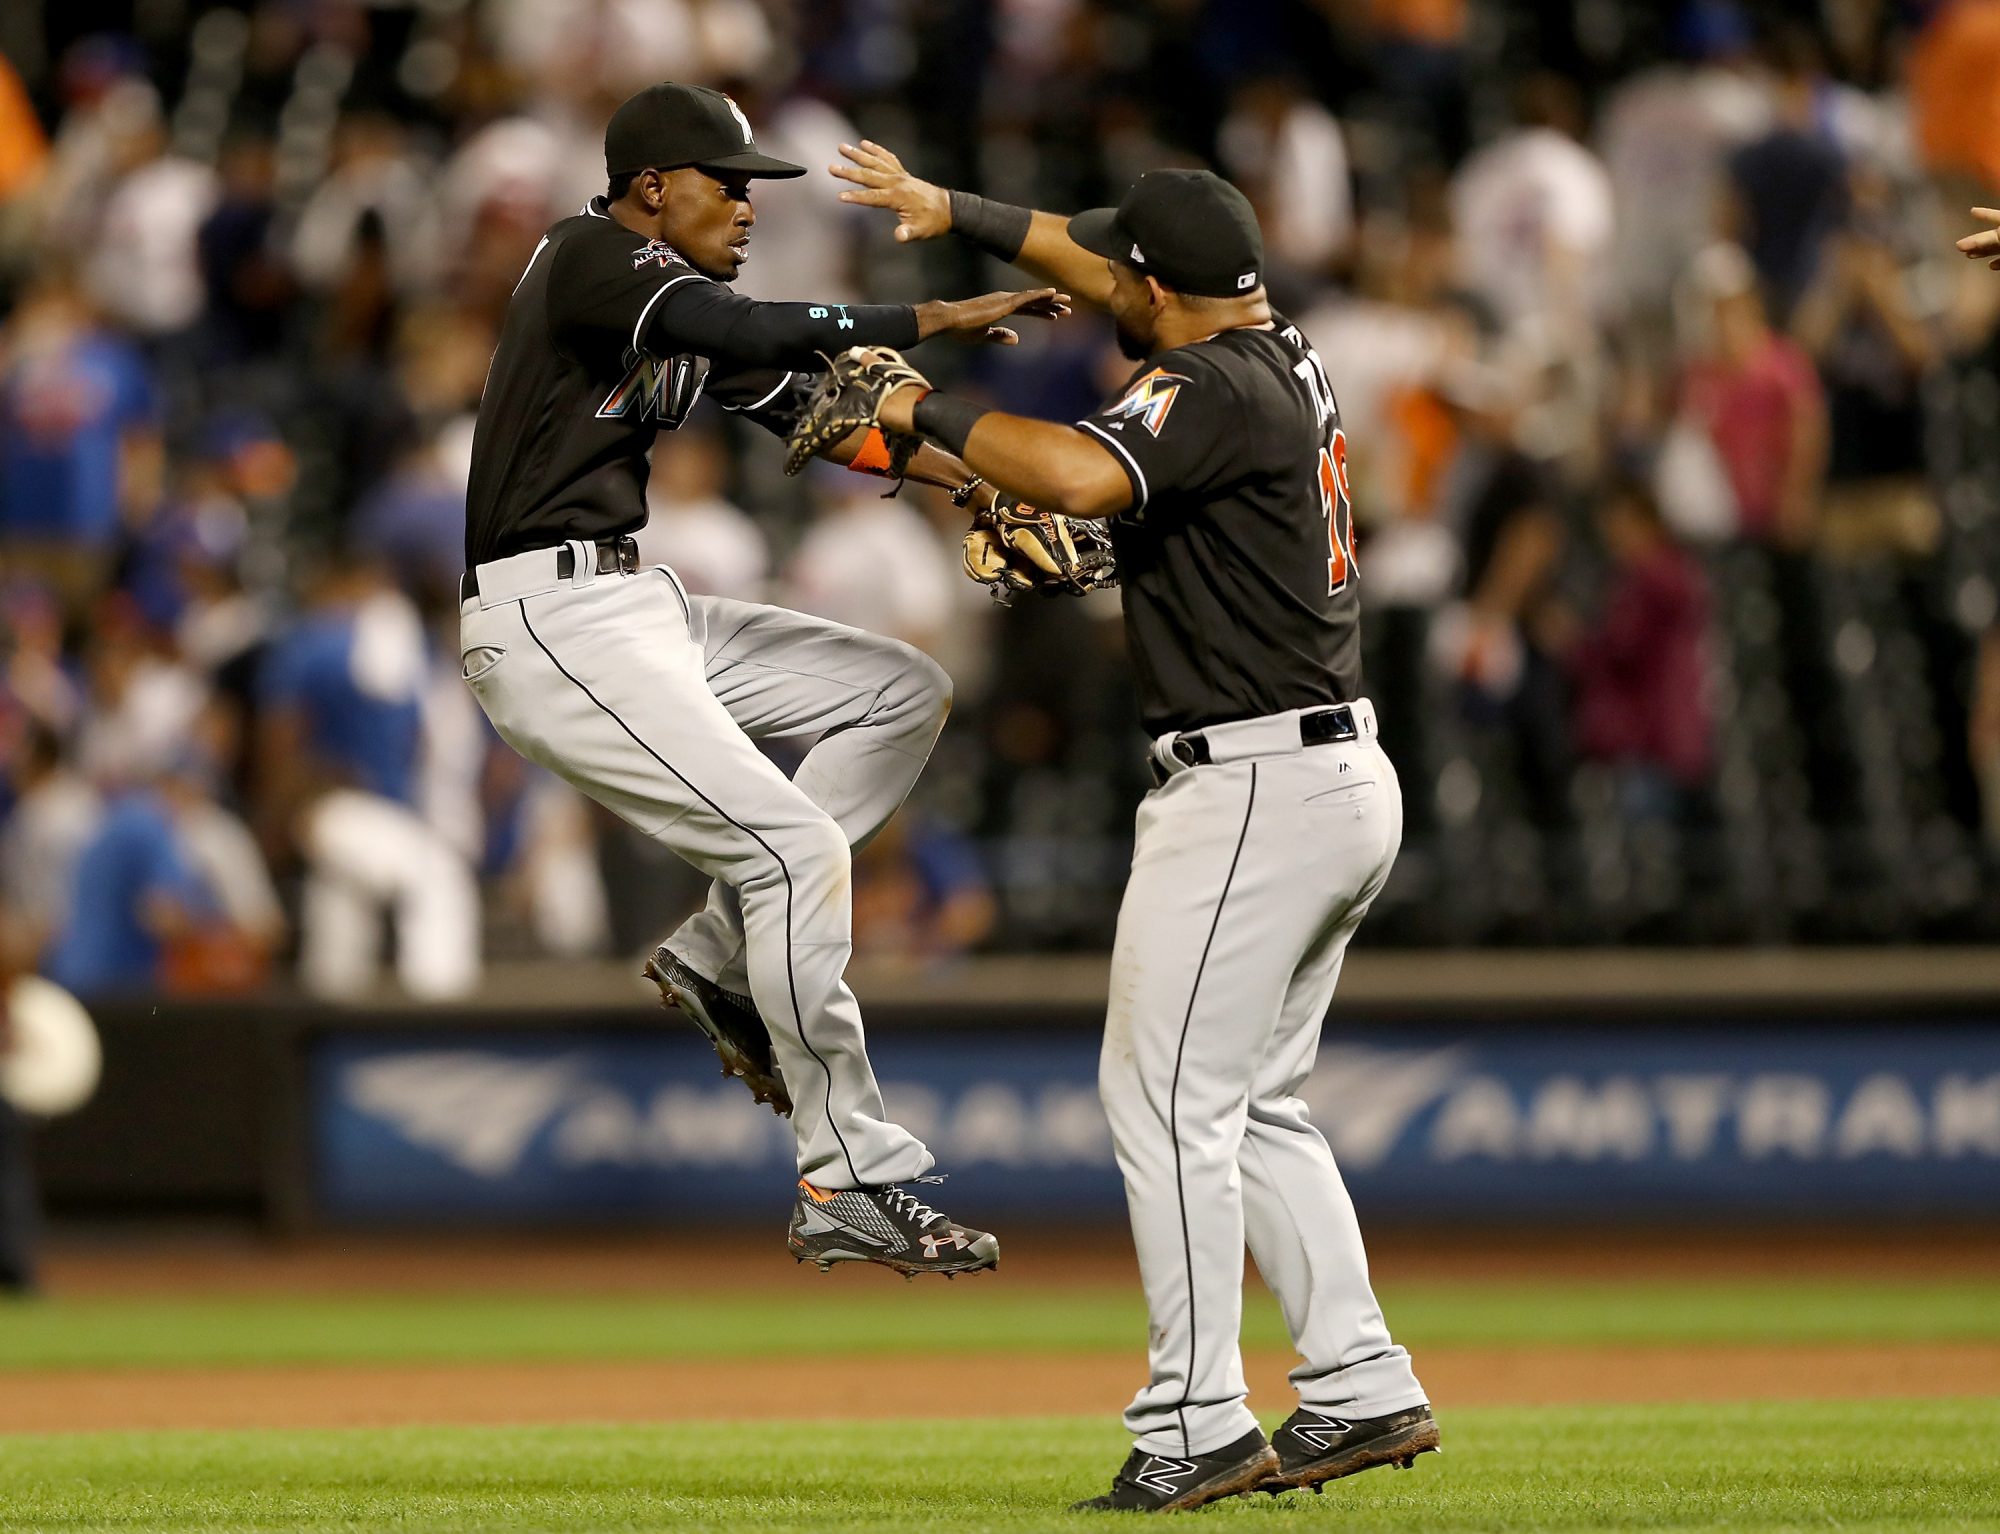 New York Mets Bats Fall Flat in 3-1 Loss To the Miami Marlins (Highlights) 2